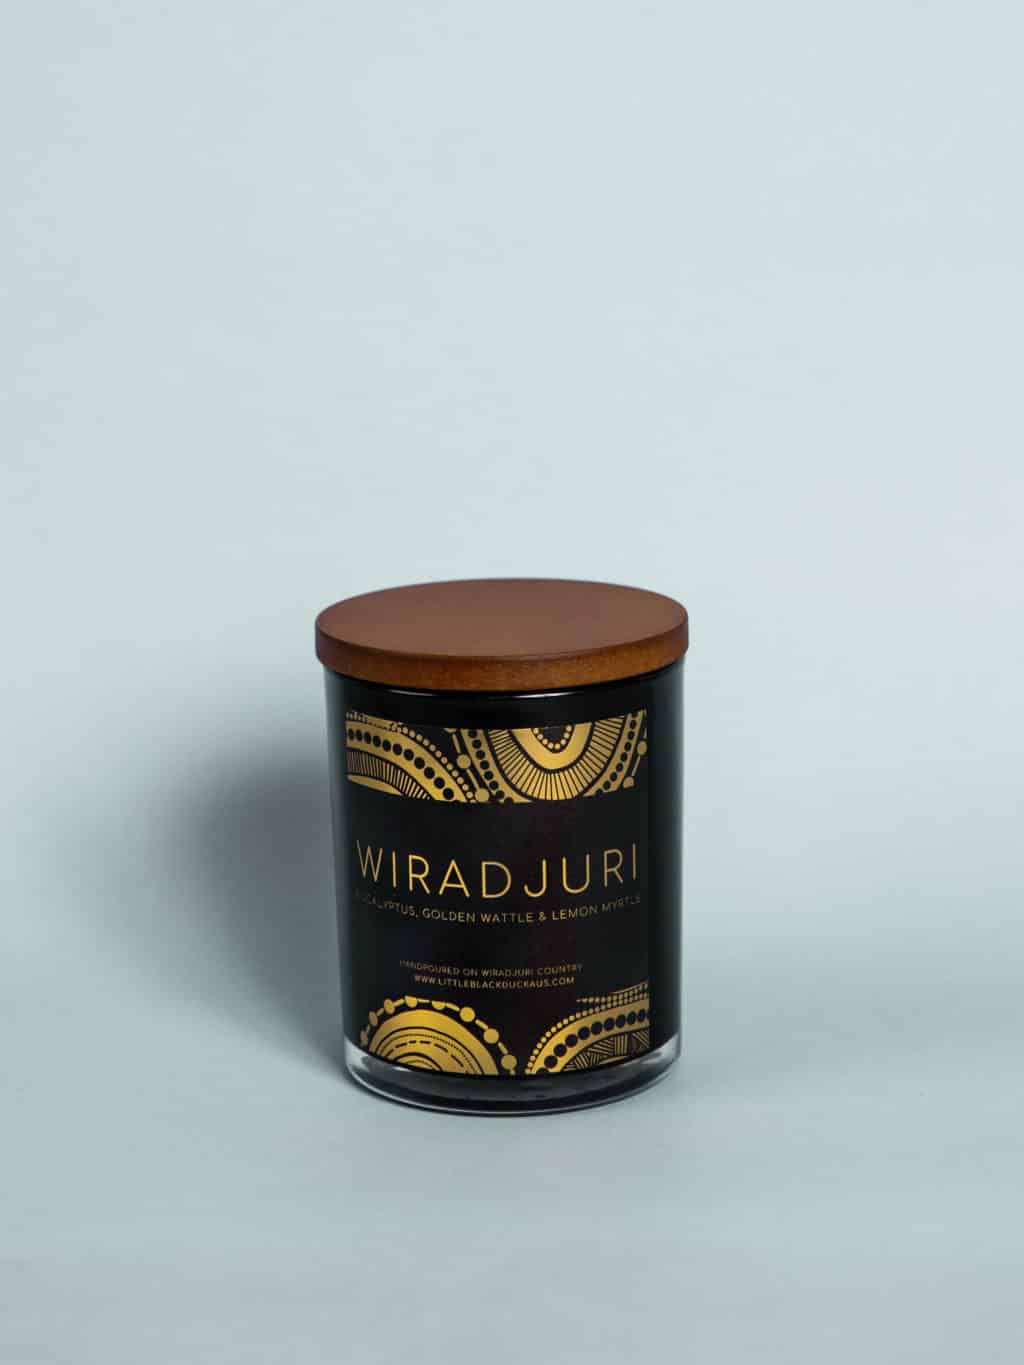 A Wiradjuri candle. A beautiful gift at our boutique, Wagga Wagga florist shop.